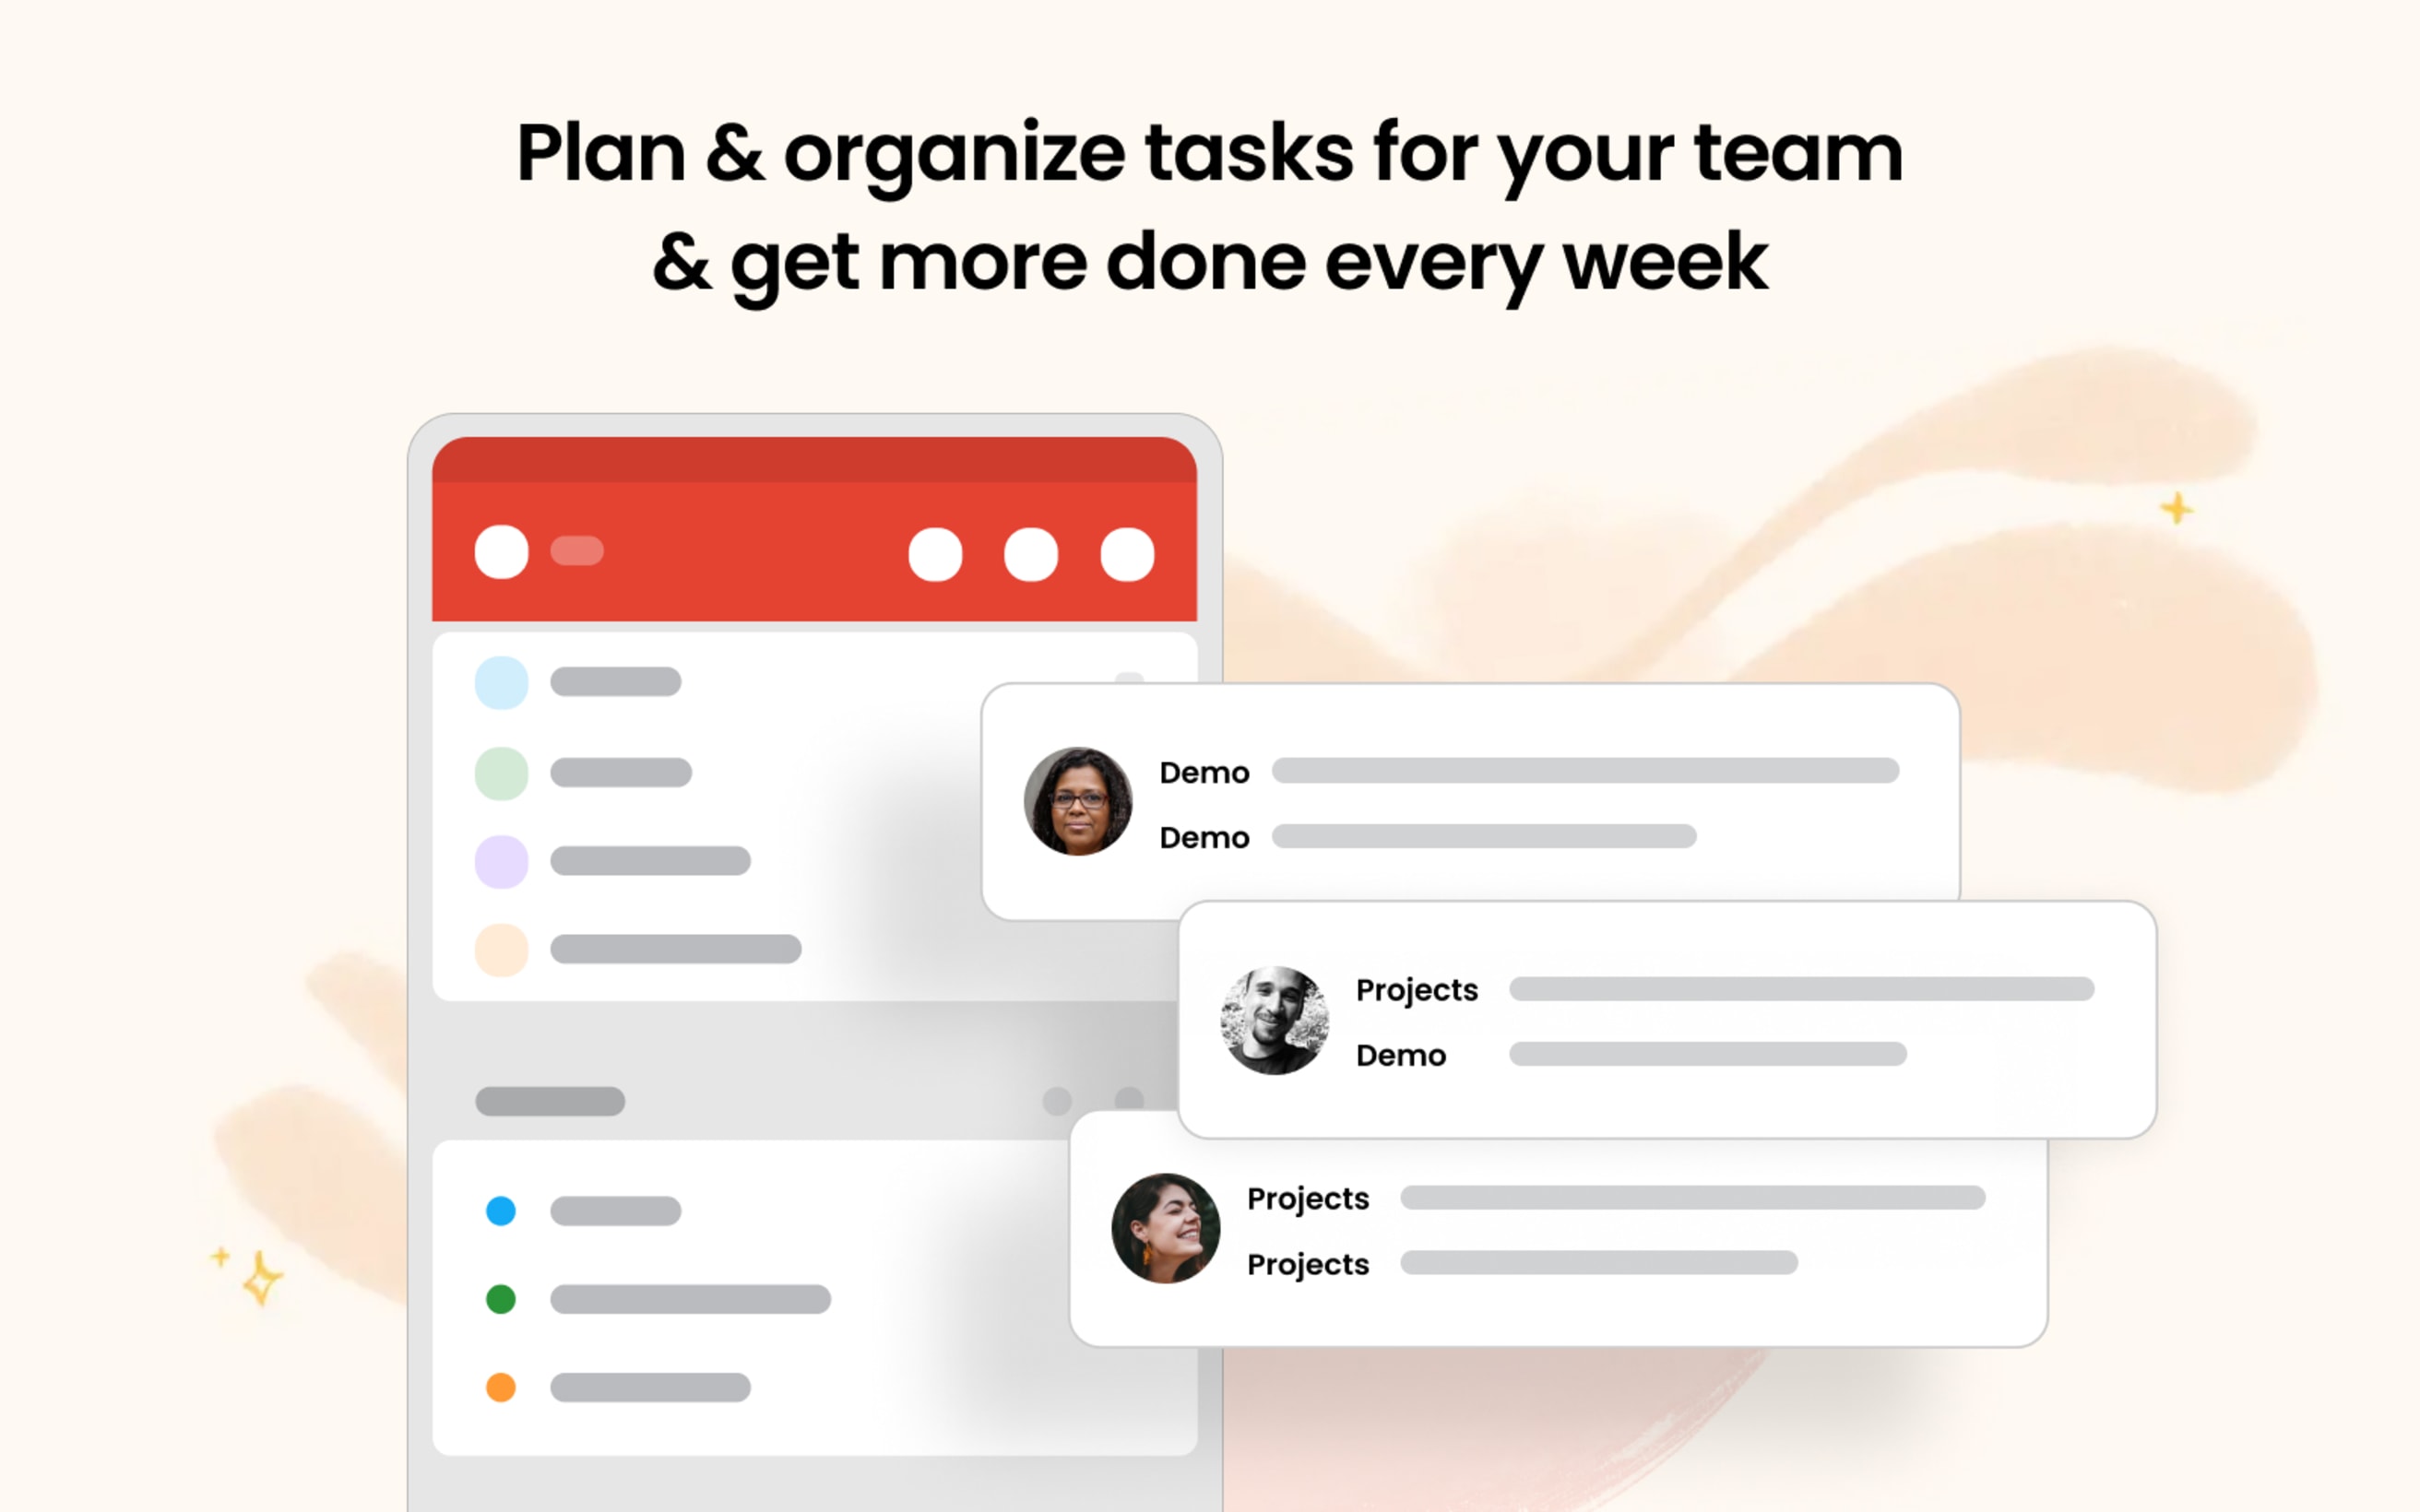 Plan & organize tasks for your team & get more done every week.